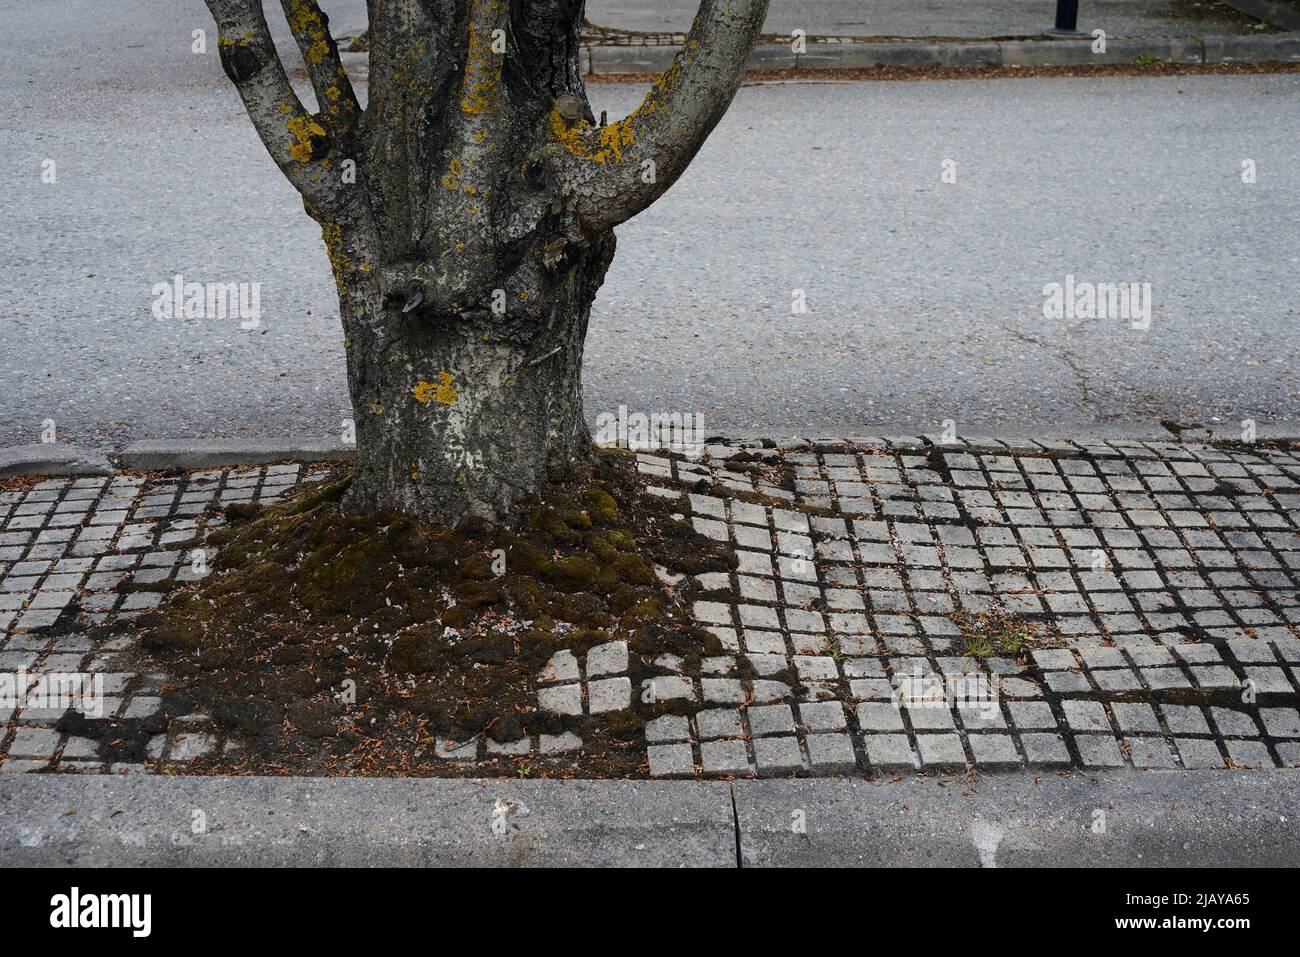 urban trees growing on asphalt, room for text Stock Photo